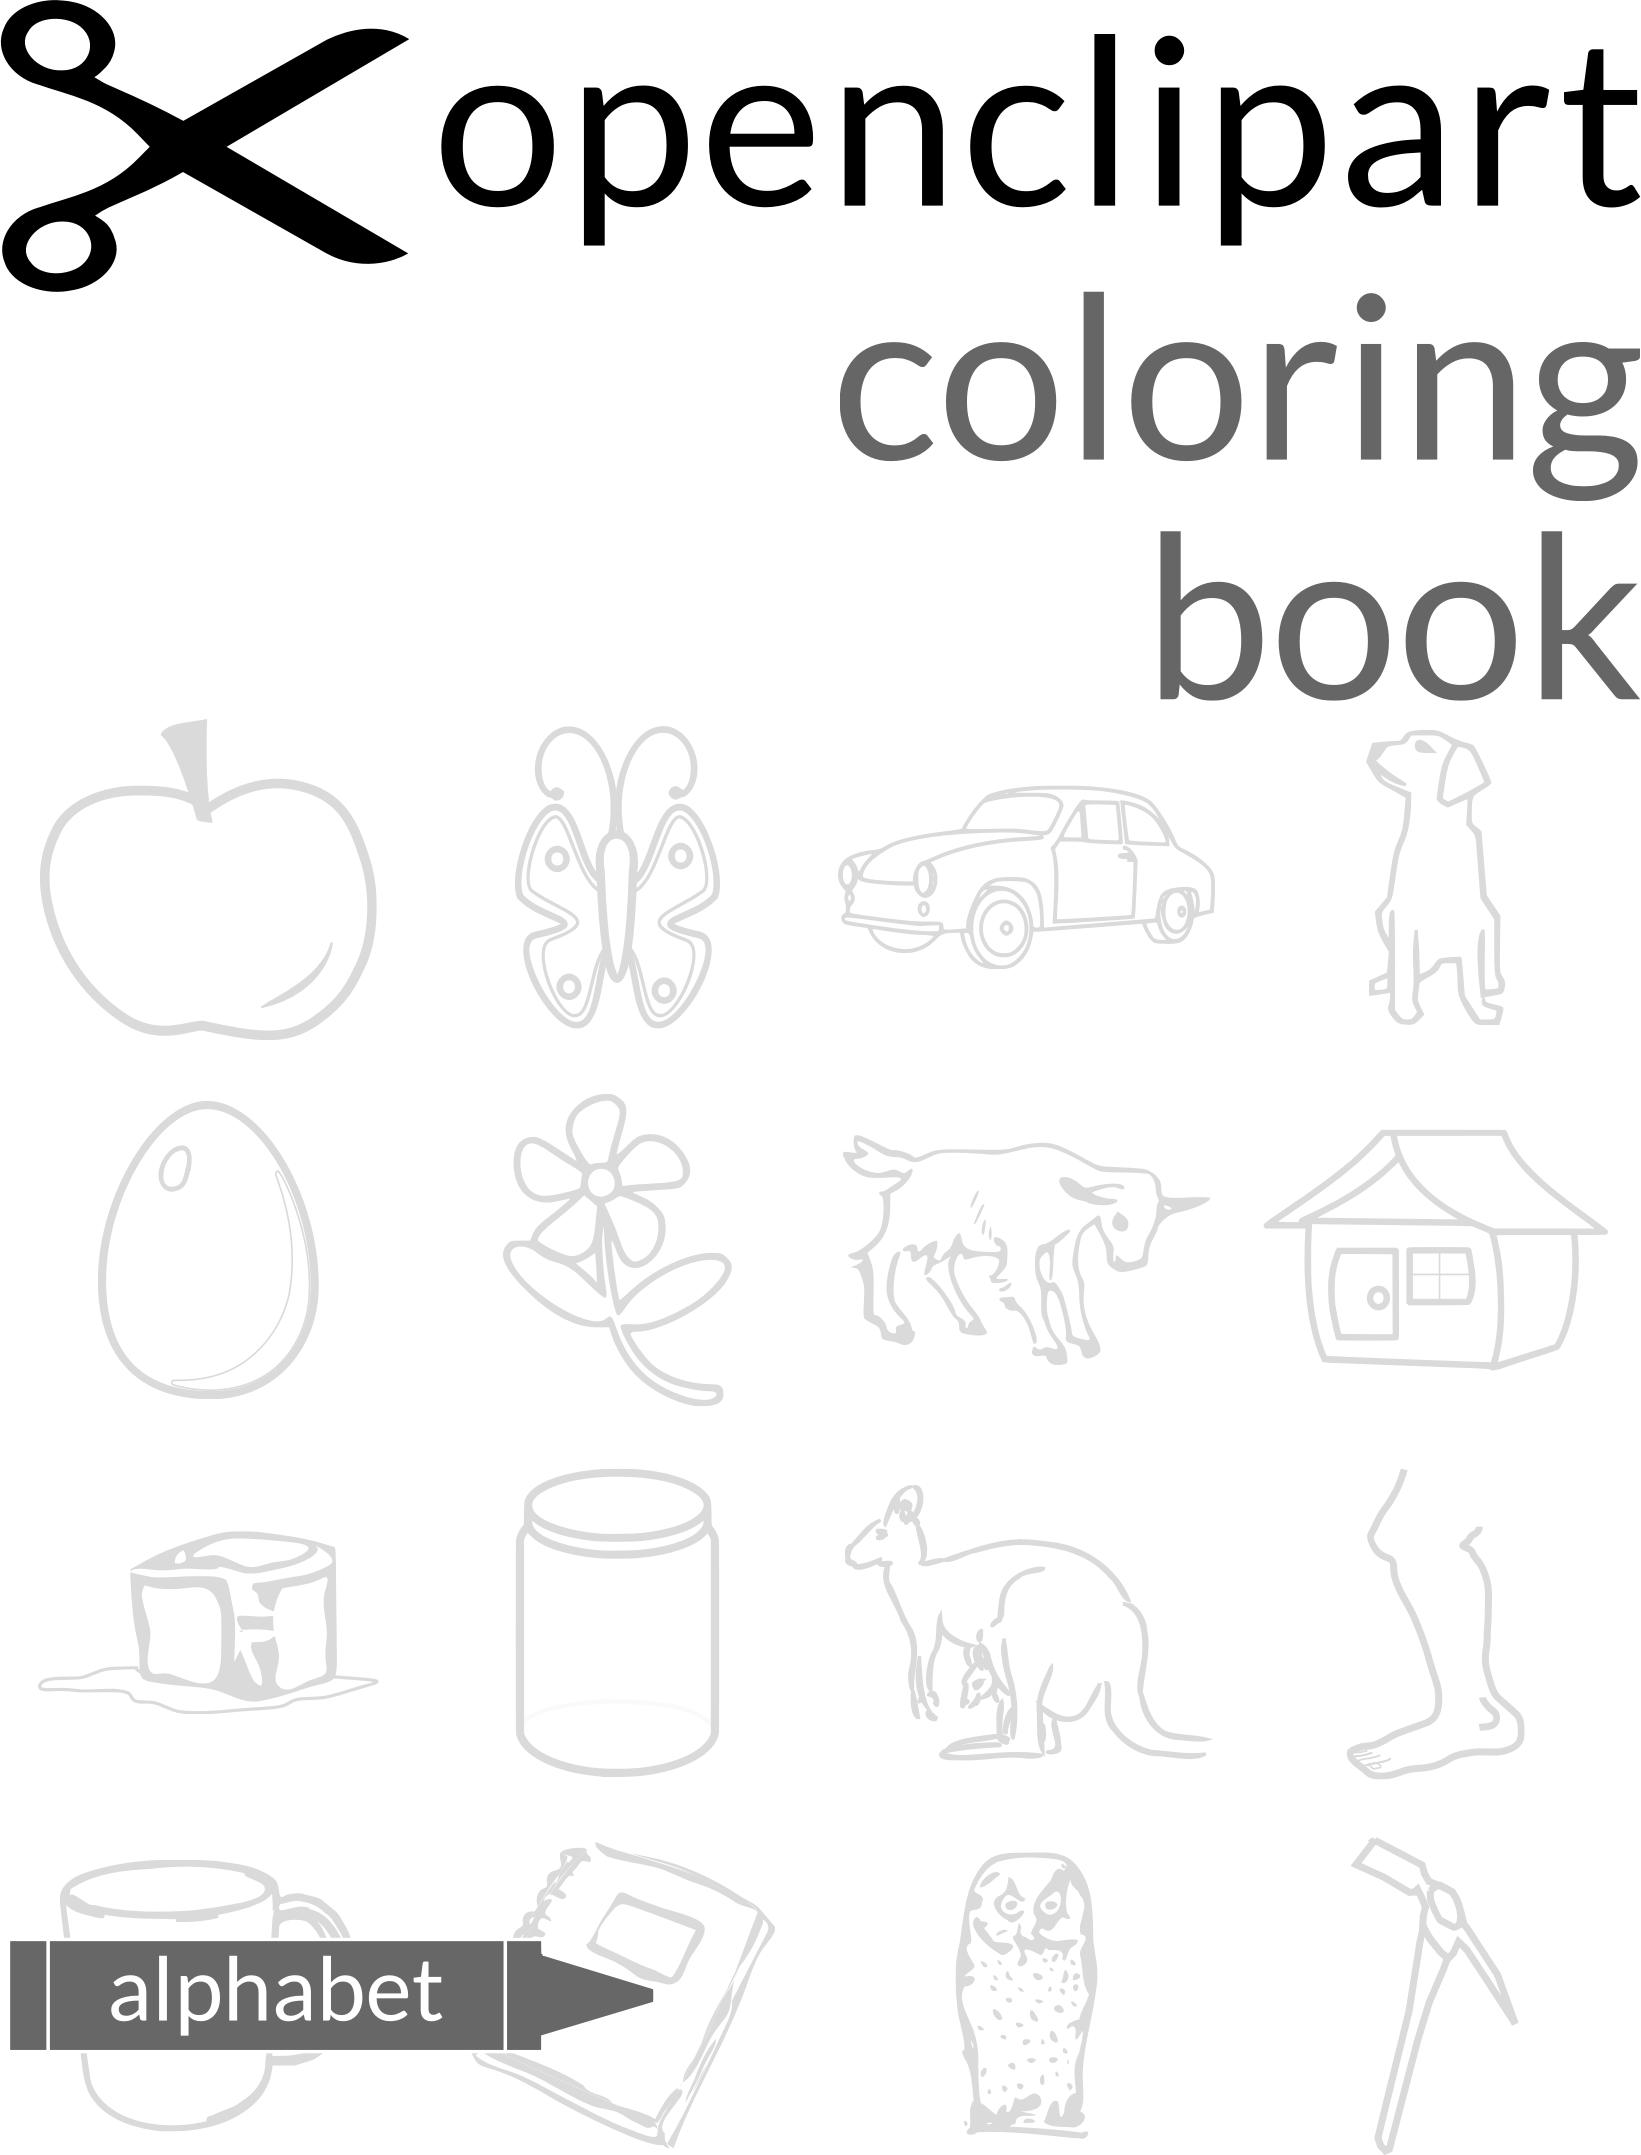 NEW: Openclipart Coloring Books Alphabet Released. Download for FREE. PNG icons